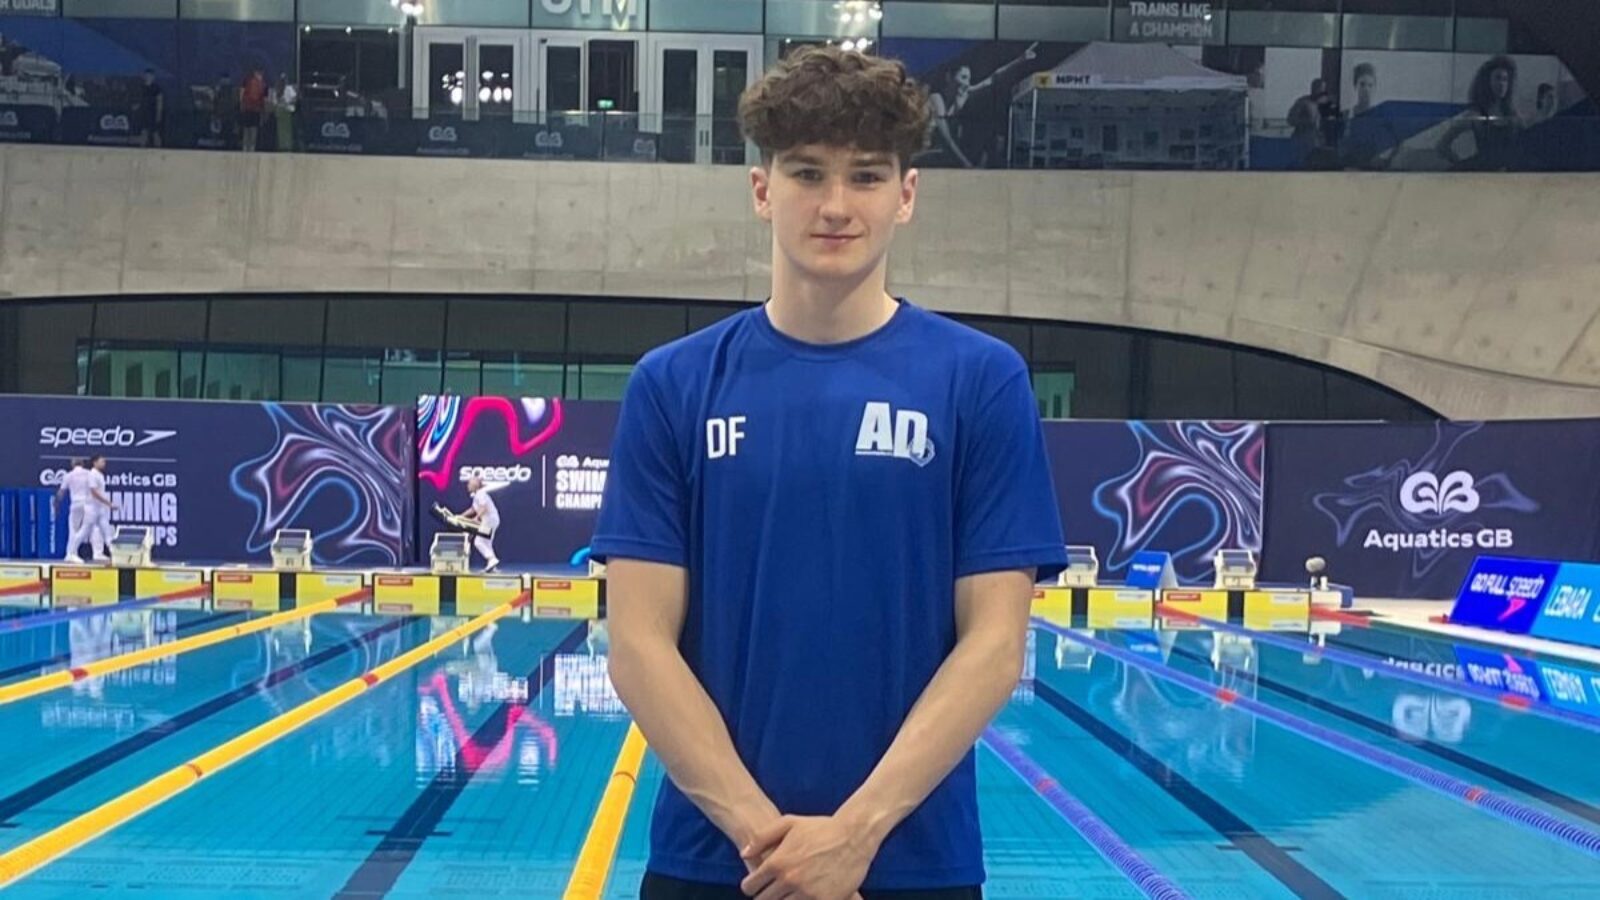 Aberdeenshire School pupil Dean Fearn shines among Britain's fastest swimmers